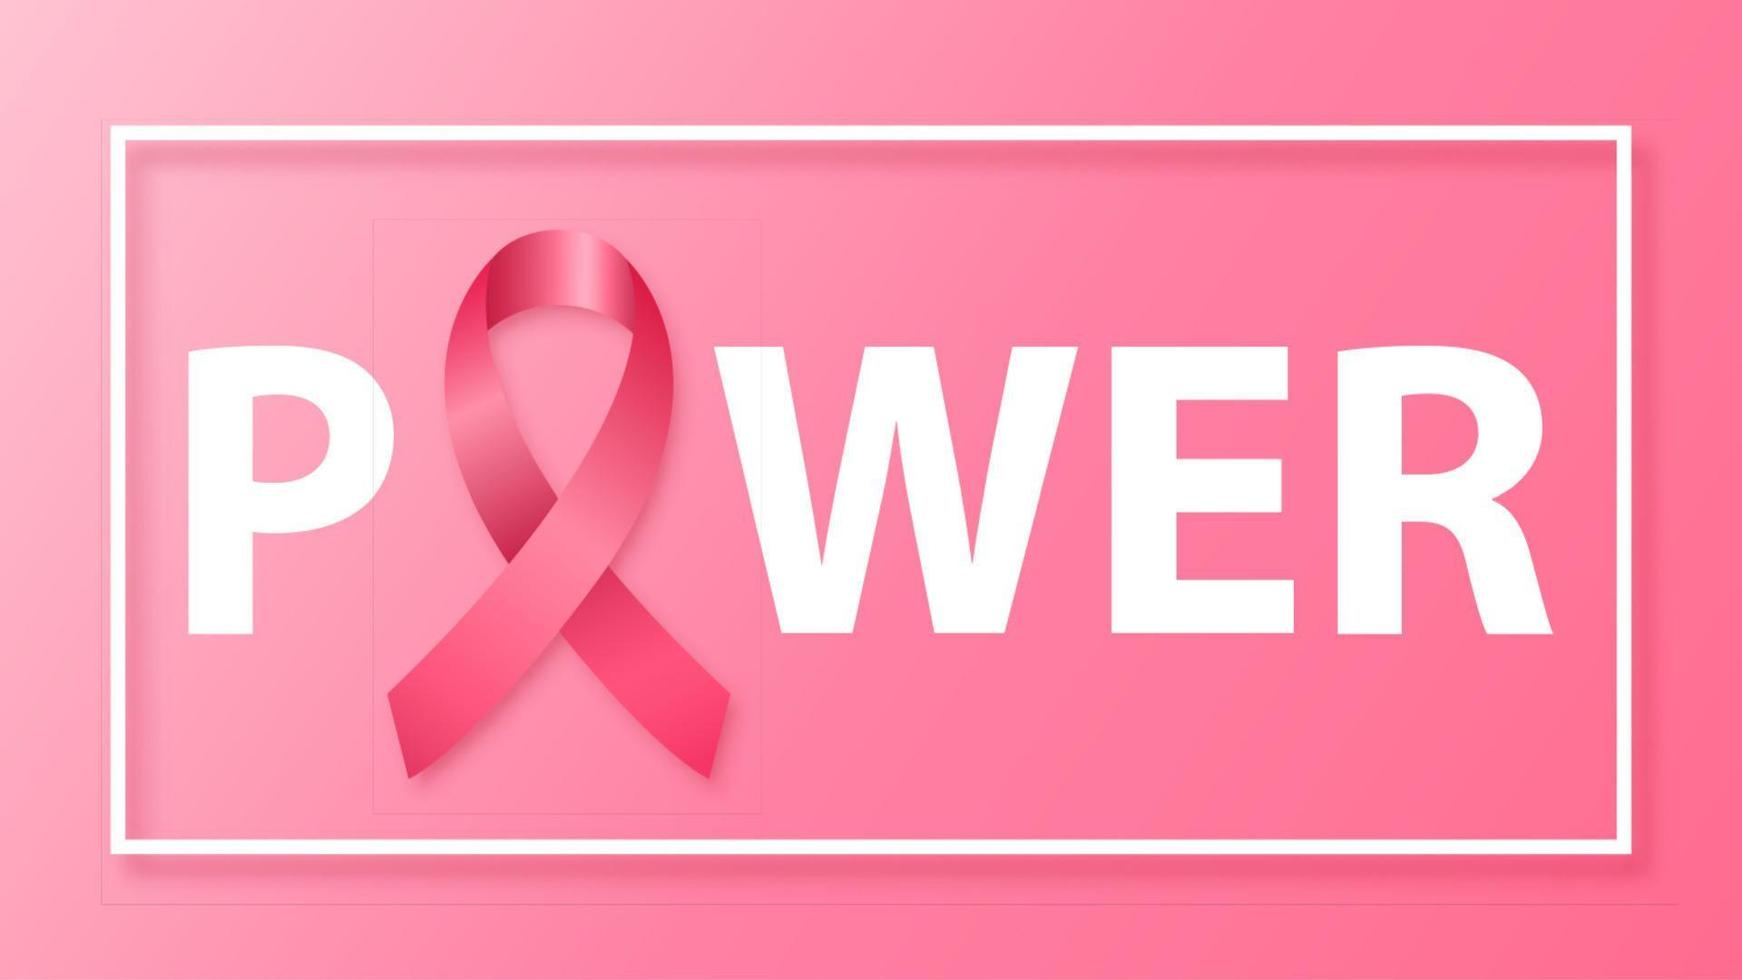 Word Power with pink ribbon instead letter O. Symbol of Breast Cancer awareness month. Vector banner.